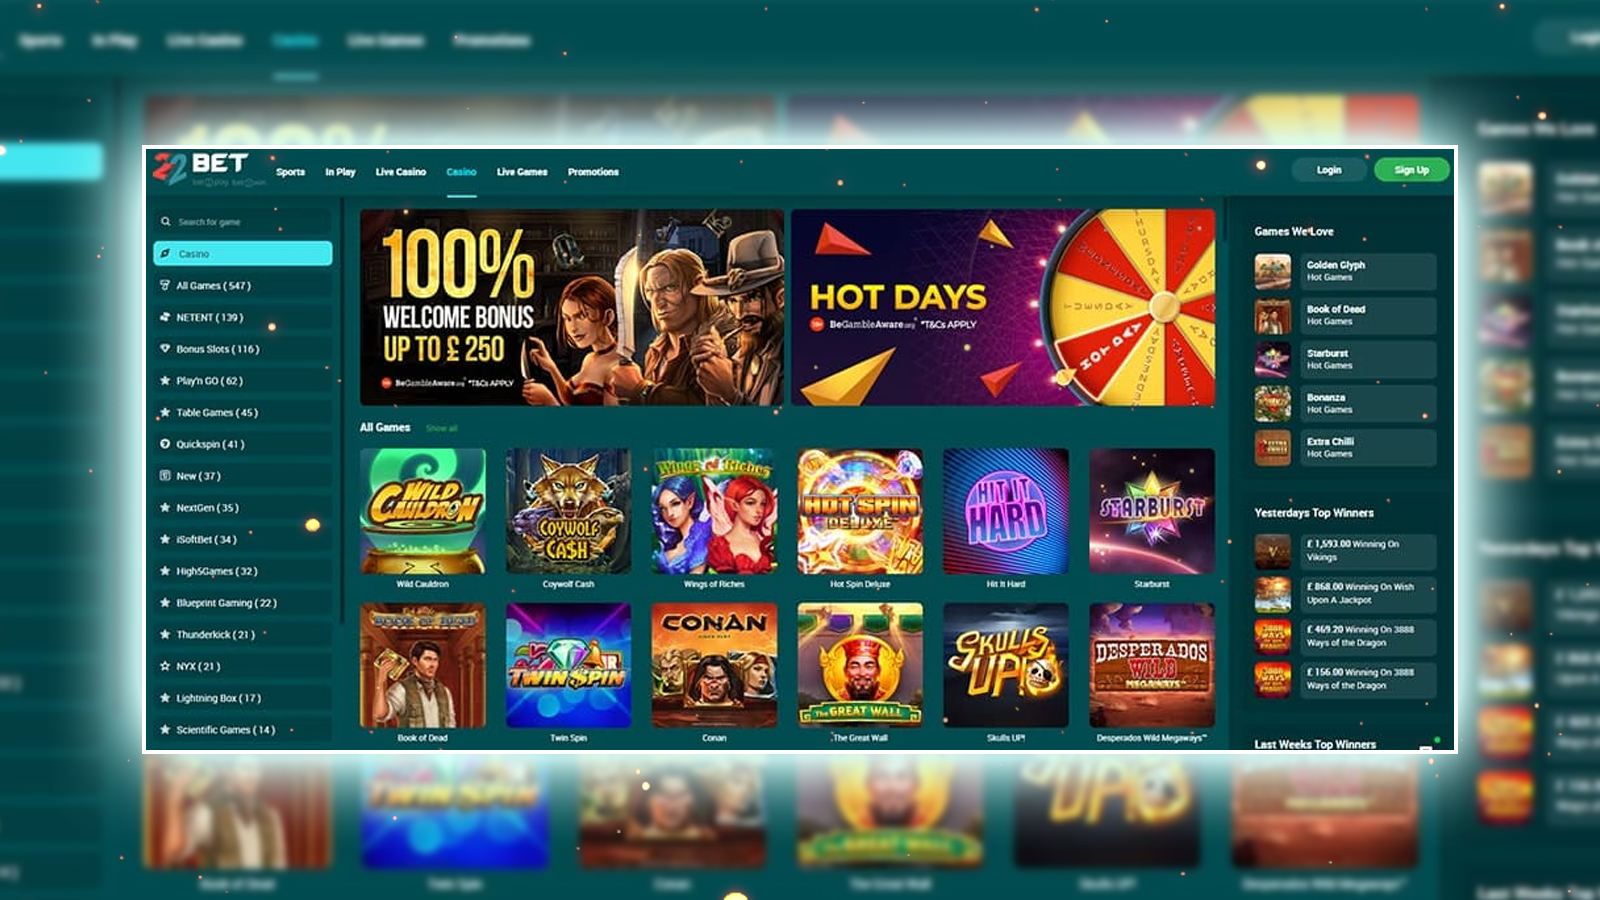 Choose 22bet Casino if you want profitable bonuses, and popular and modern casino games.